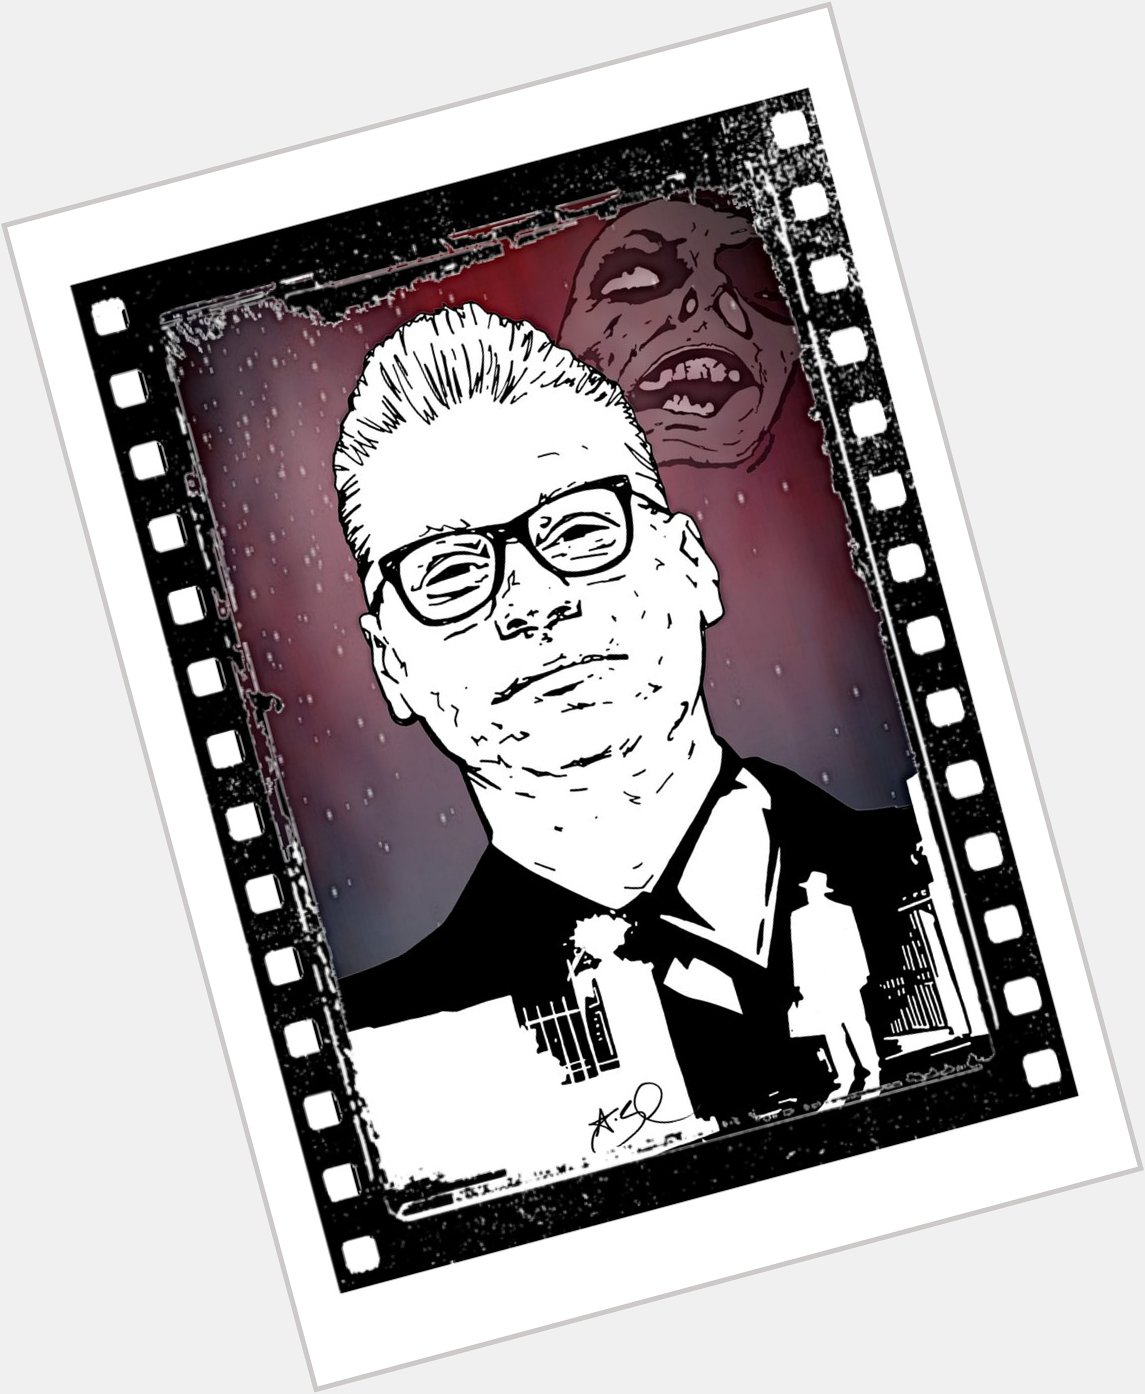 BOTD 1963 - the (other more famous) bequiffed and bespectacled kino king!
Happy Birthday Mark Kermode! 